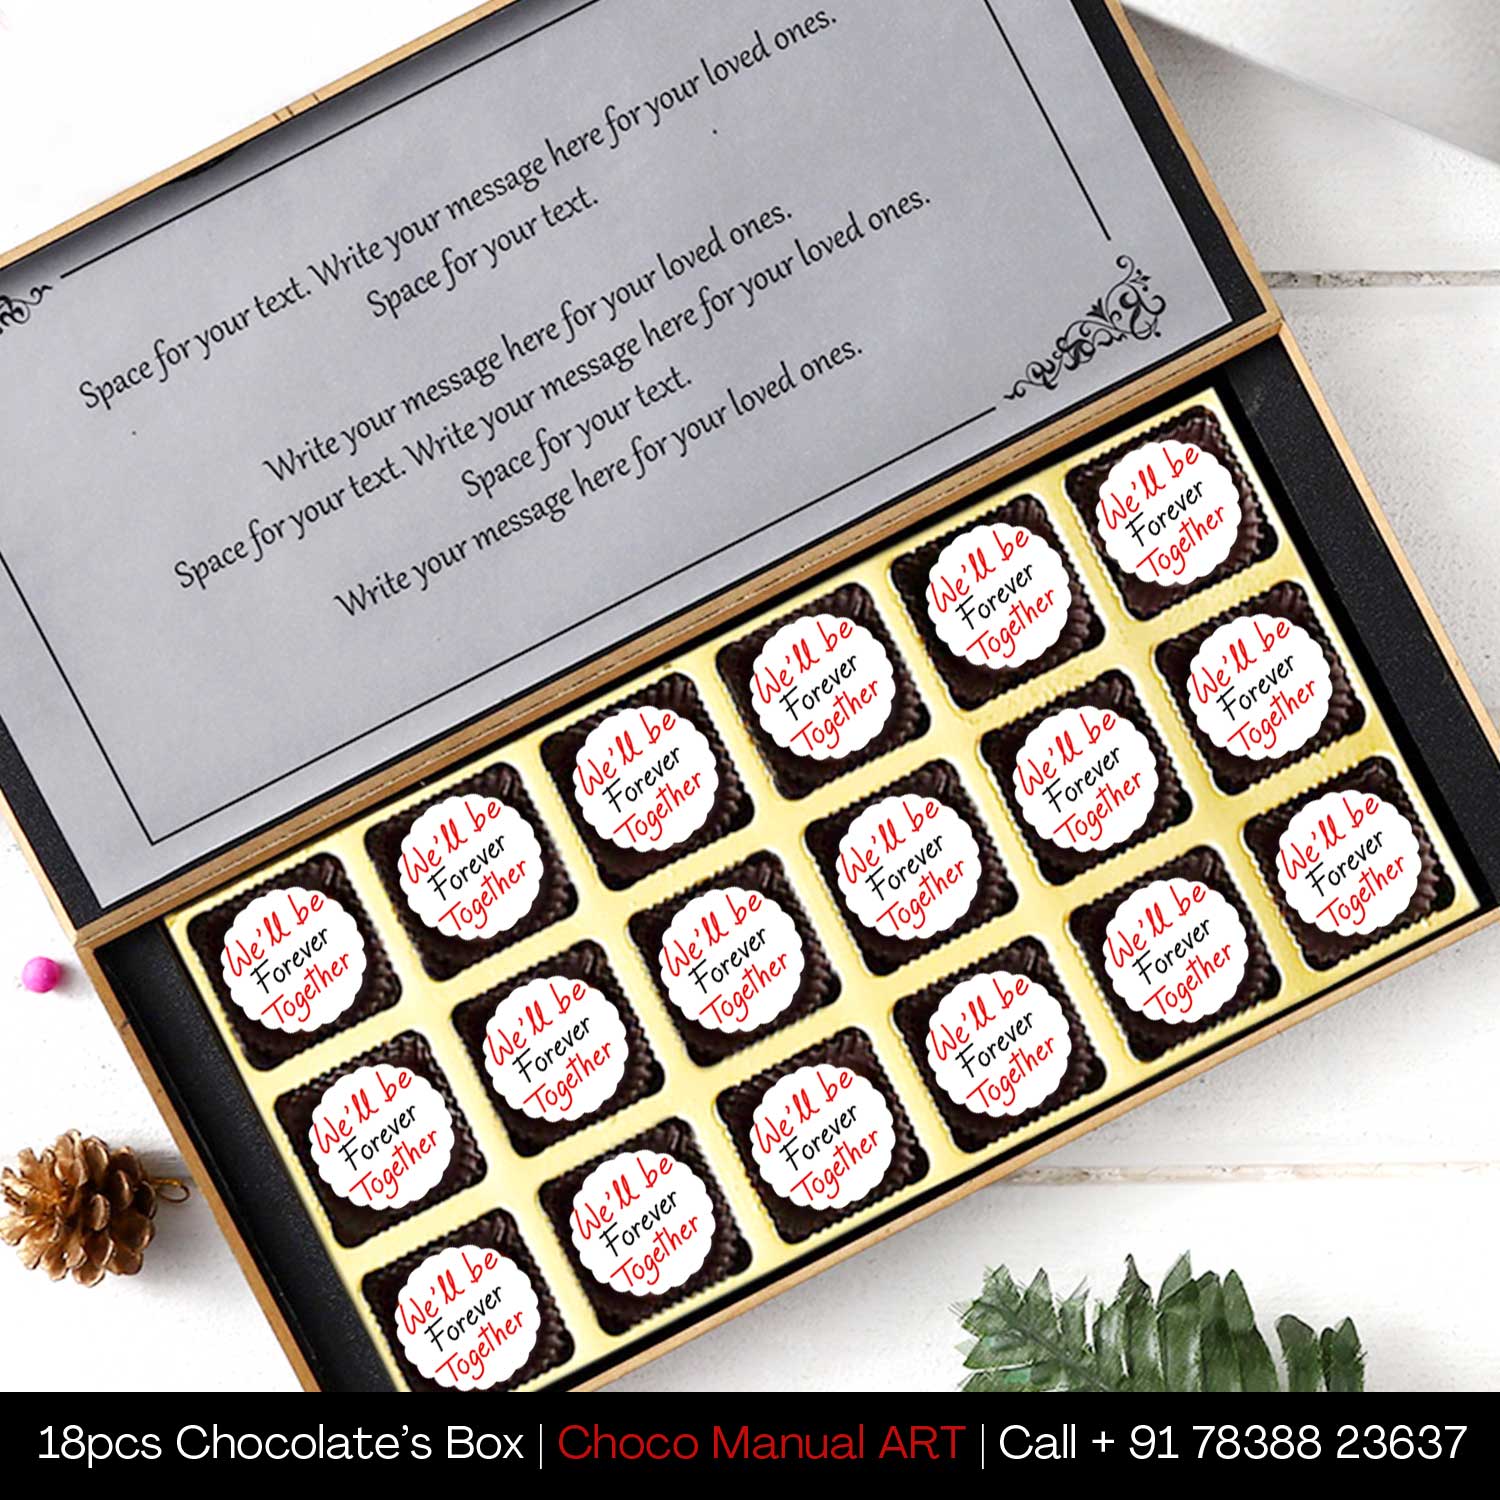 personalized chocolate gifts personalized chocolate gift box personalised chocolates  personalised chocolates with photo personalised chocolates with names customised chocolates near me personalised chocolates with photo india